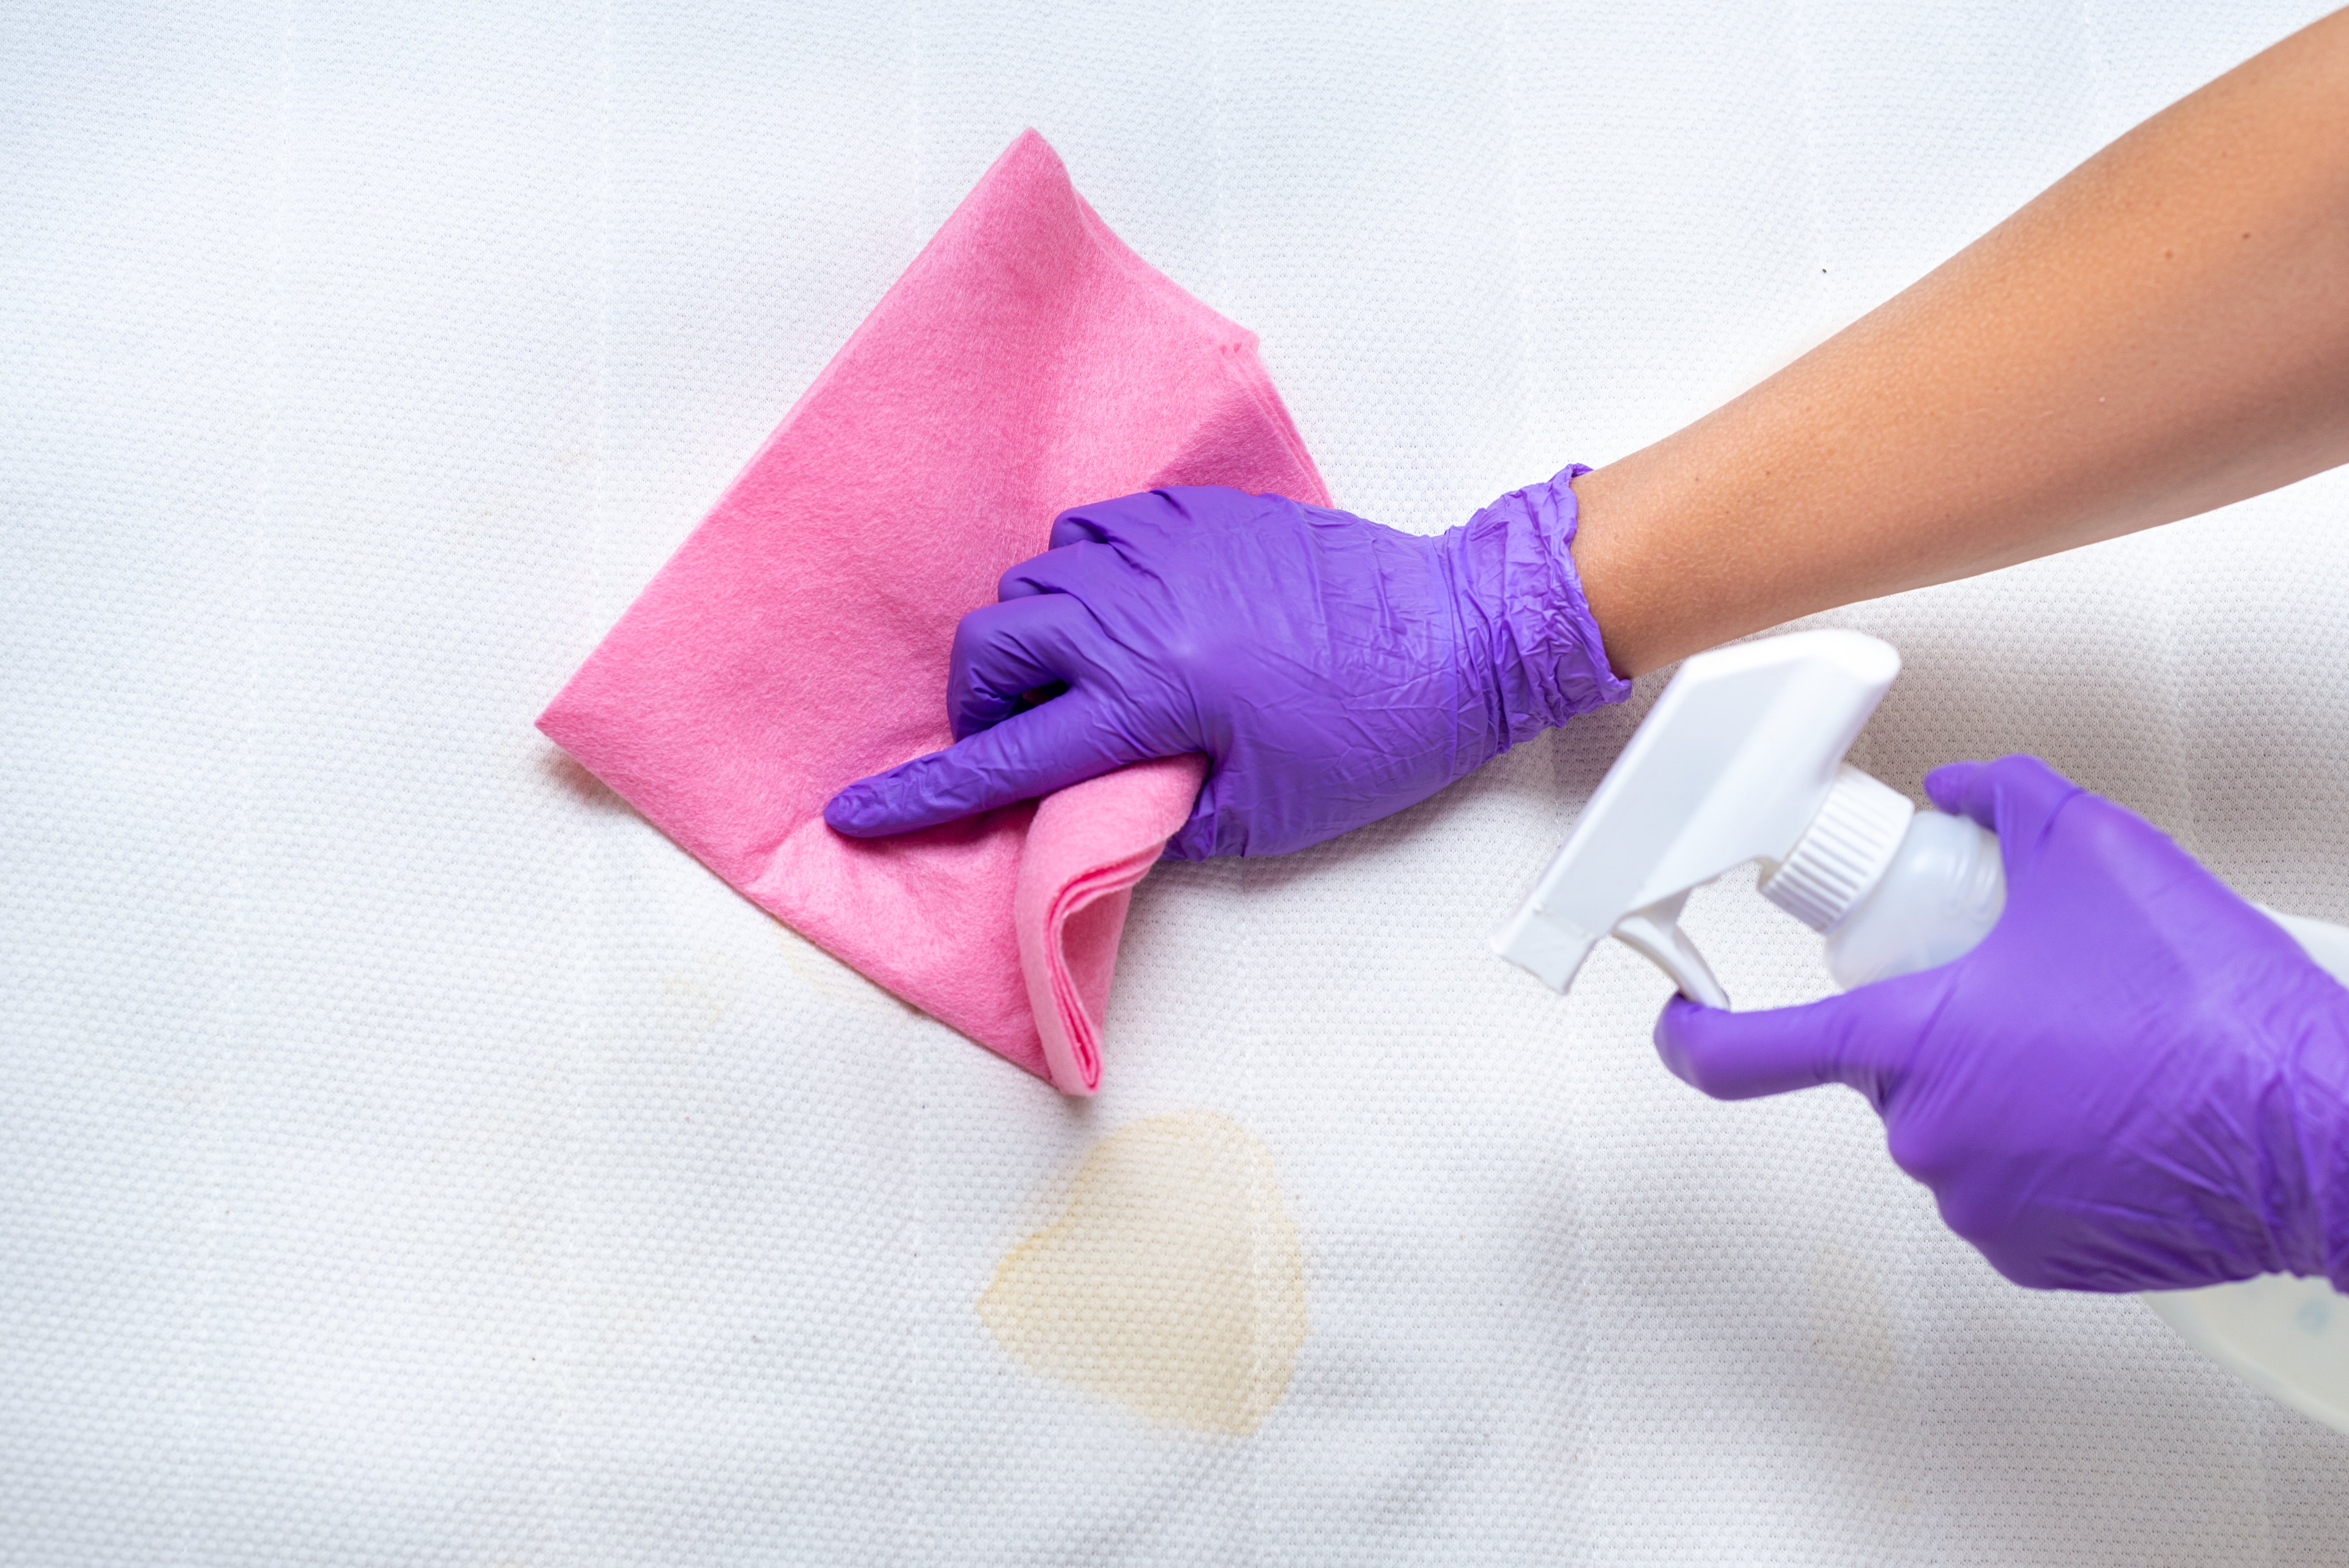 A latex gloved hand wipes a stain on a mattress with a microfibre cloth. The other latex gloved hand holds a spray bottle.